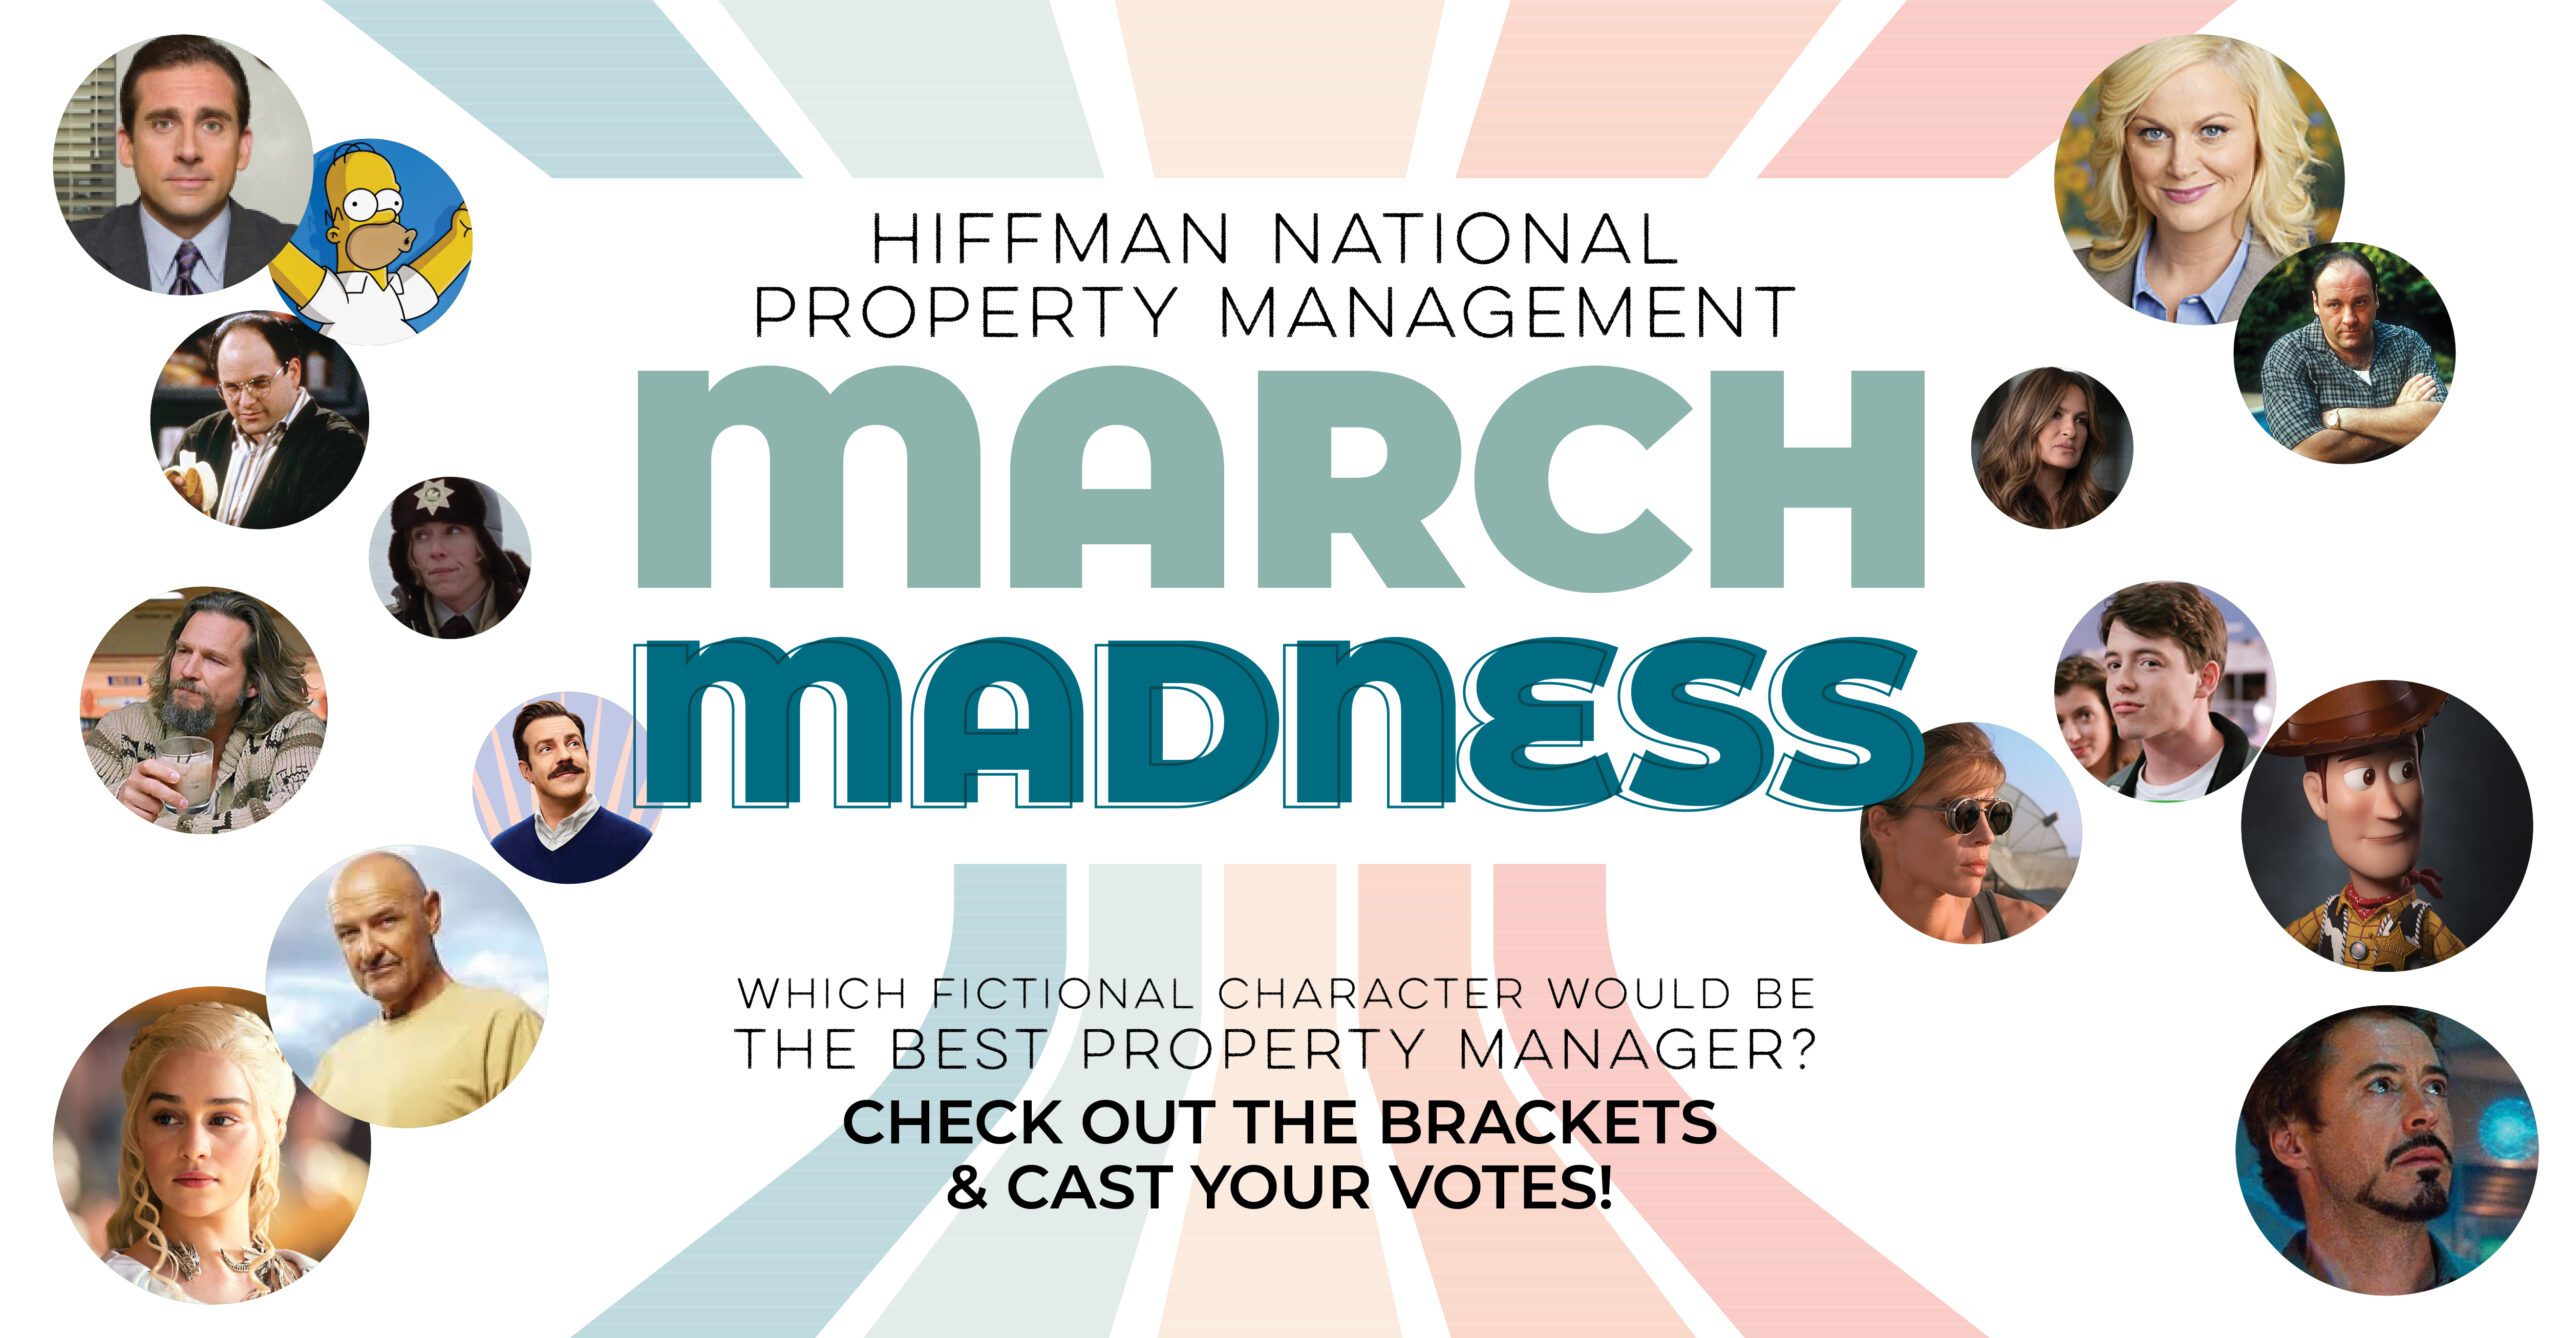 Fictional Characters Face off in Hiffman National’s Property Management March Madness